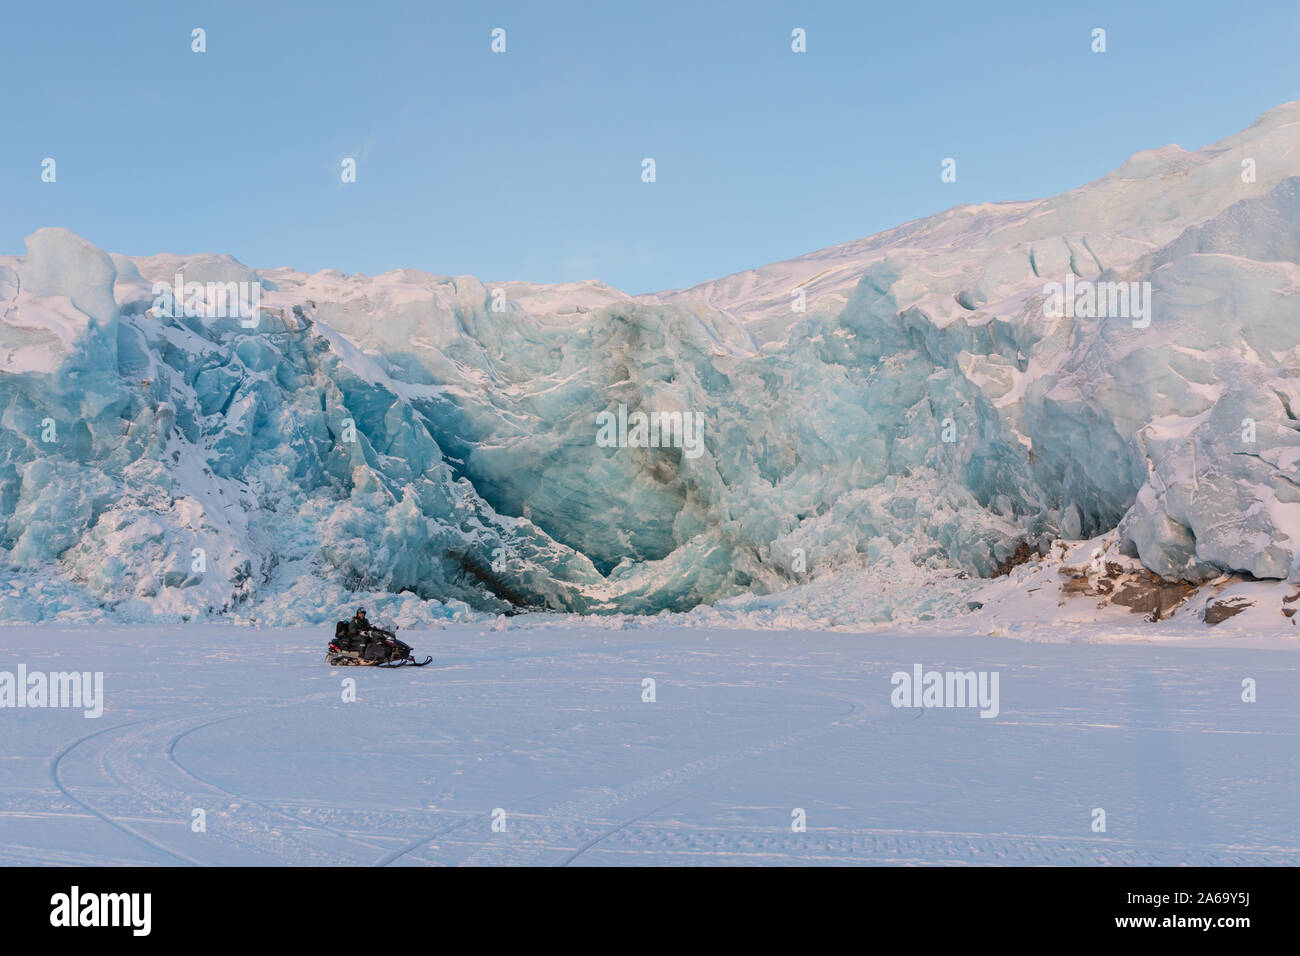 Svalbard, Norway - March 2019: Man on snowmobile in front of Nordenskiold glacier on Svalbard, Norway. Stock Photo